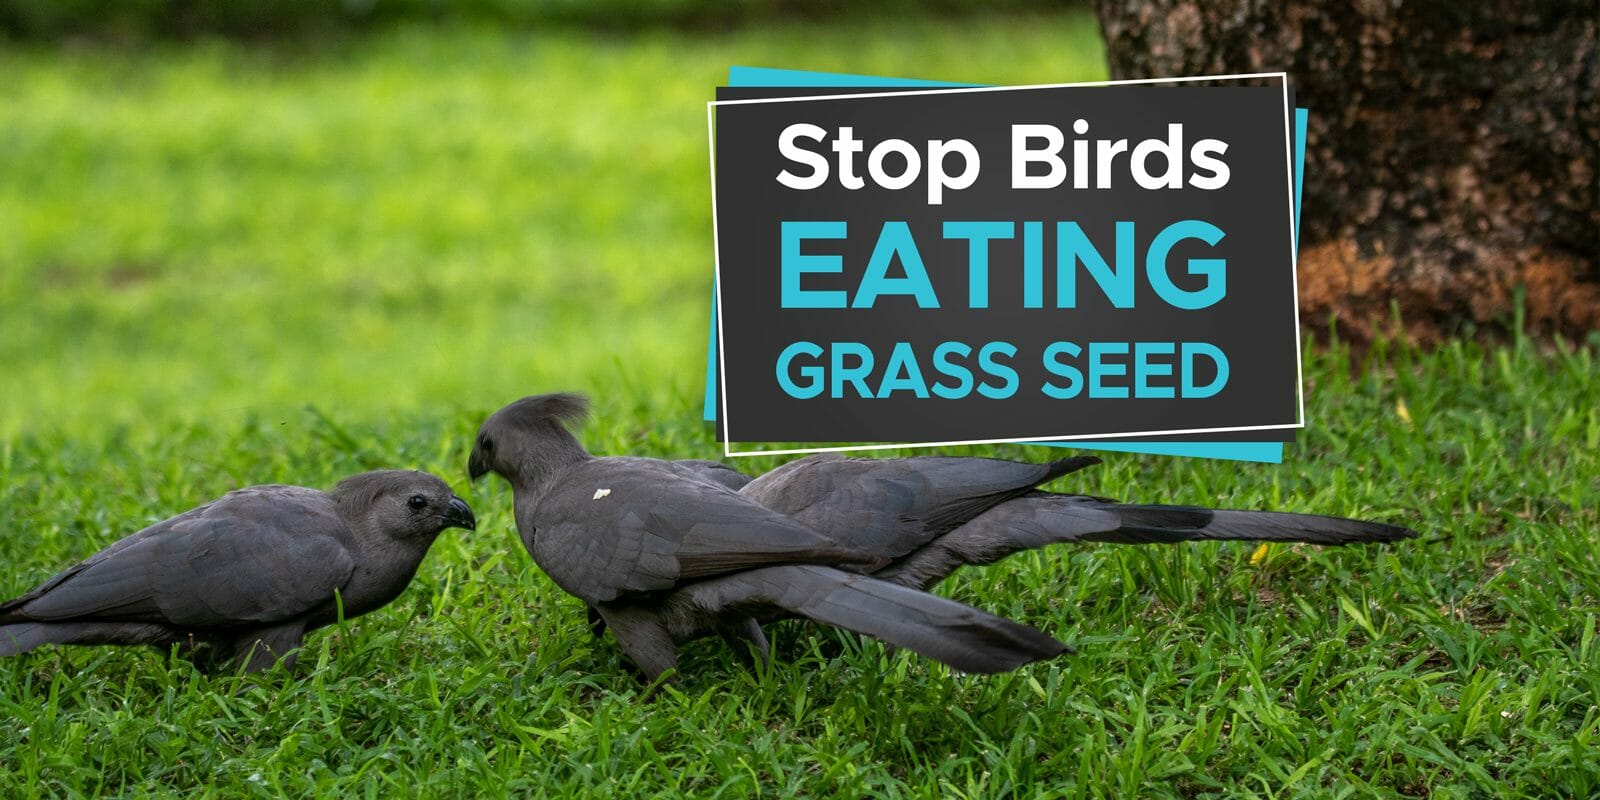 How To Protect Grass Seeds From Birds